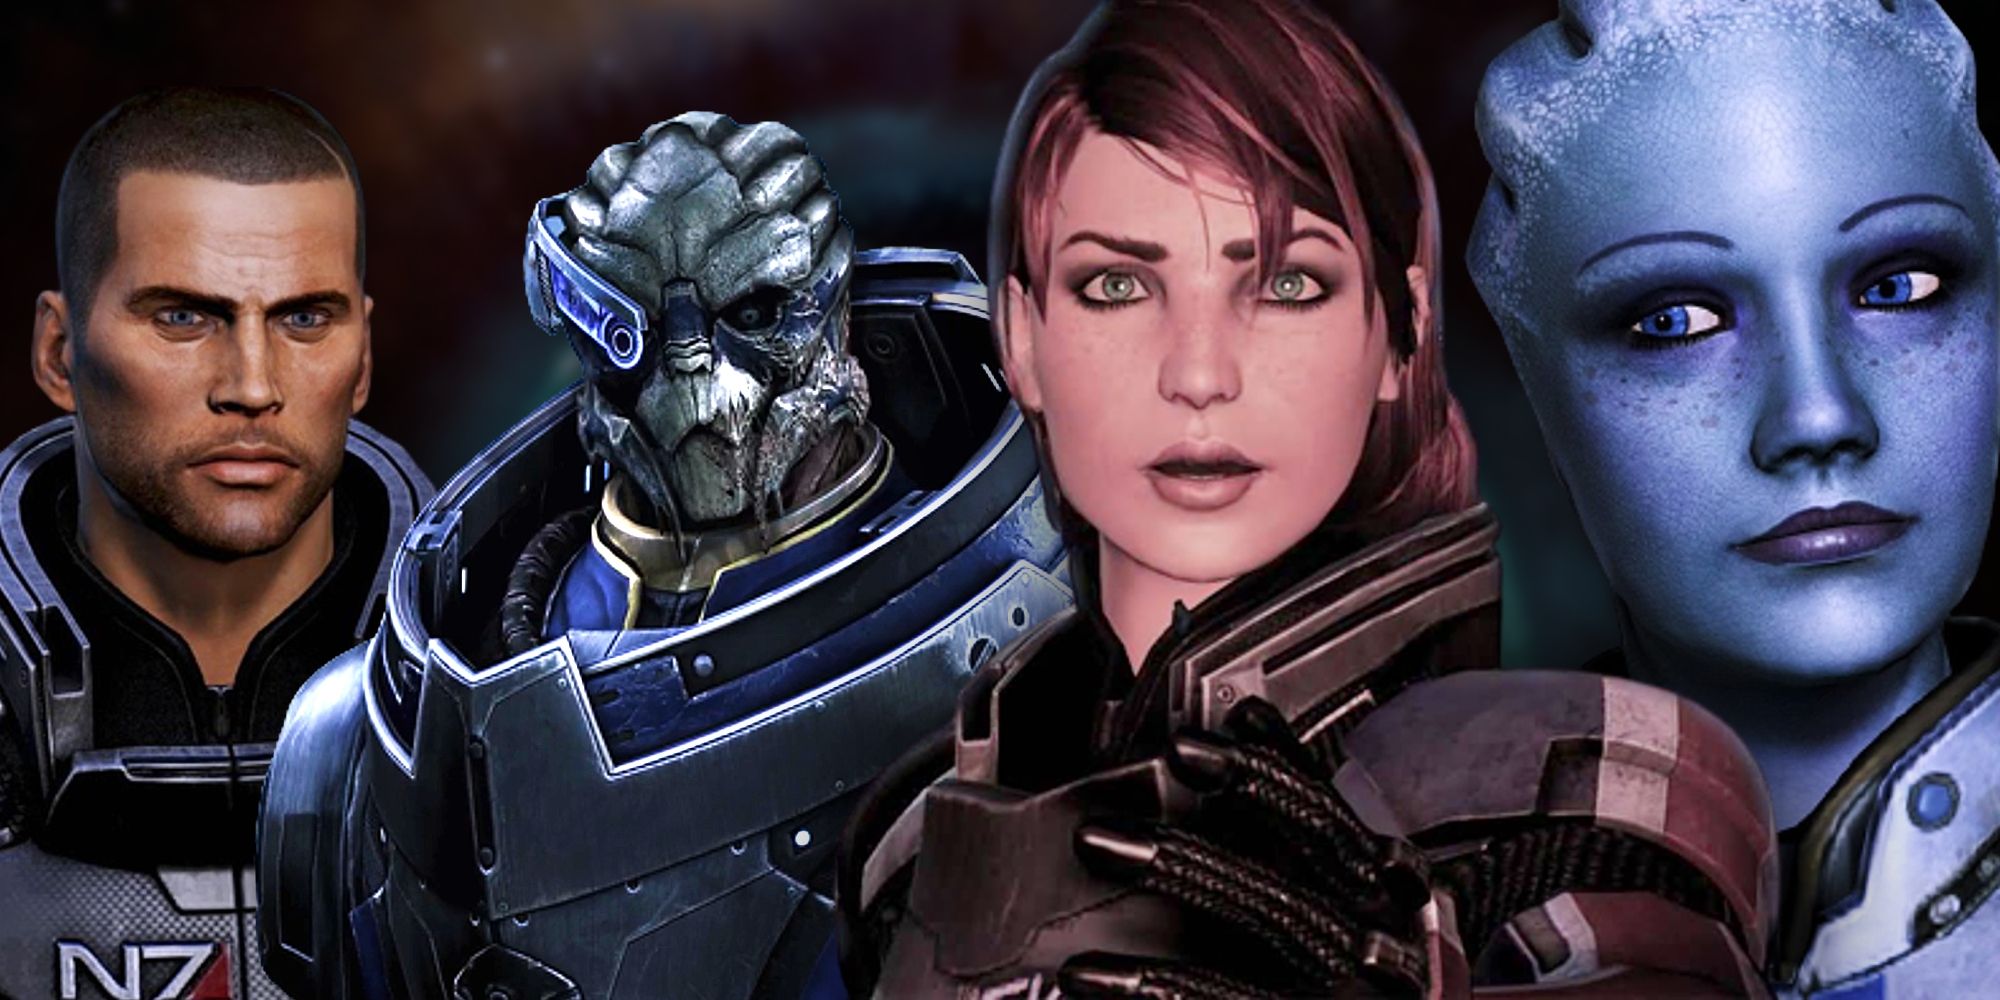 Image depicting side-by-side portraits of Mass Effect characters Commander Shepard(male), Garrus, Commander Shepard(female), and Liara.